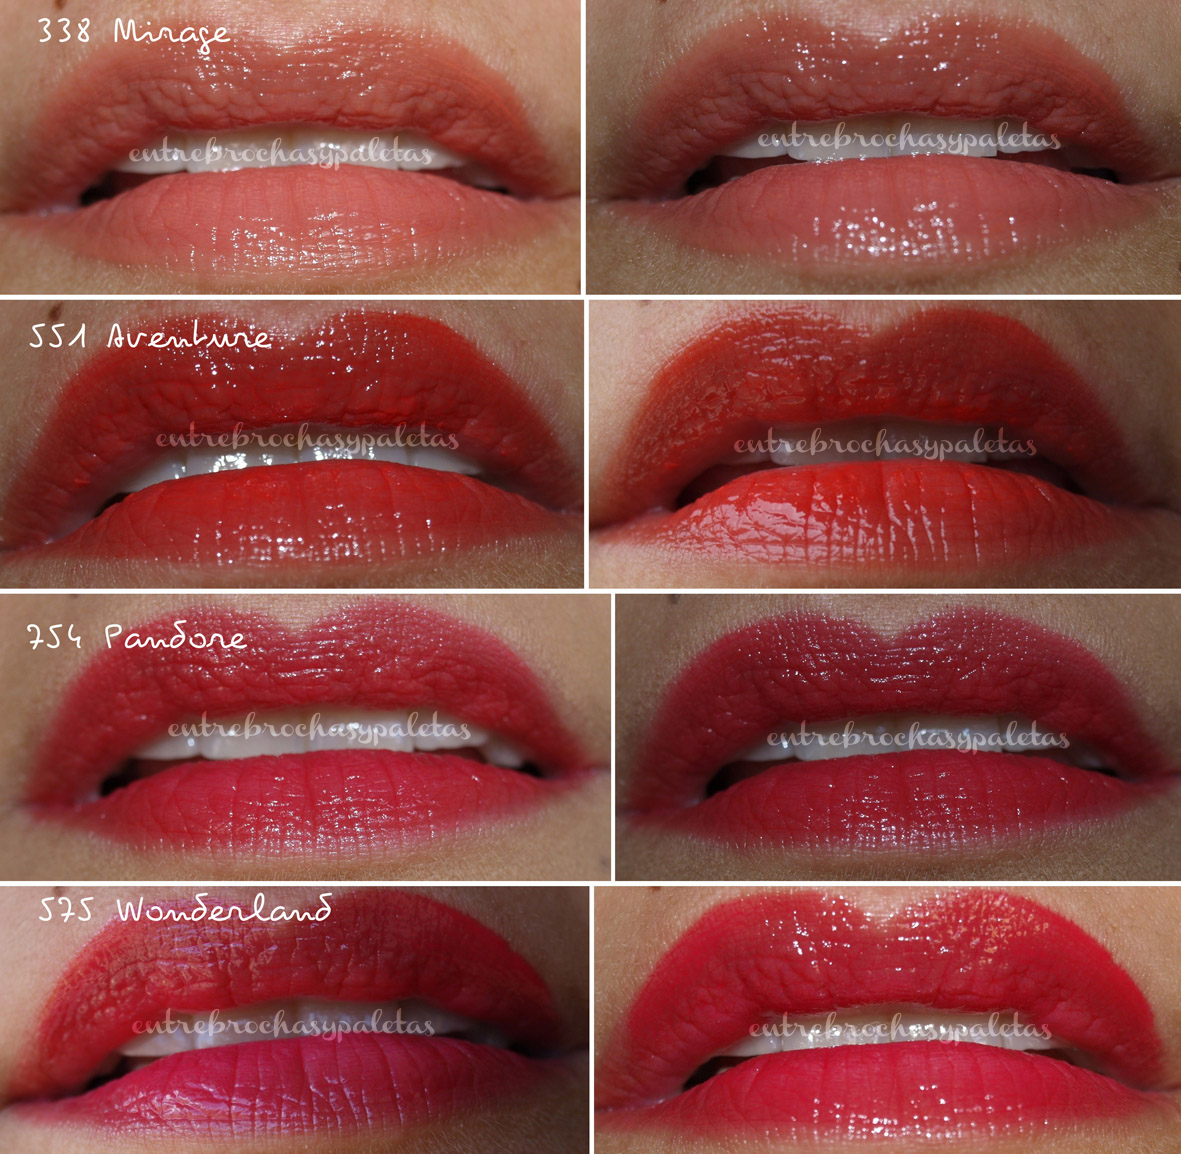 An Intriguing Dior Addict Fluid Stick for Lips  Review  Swatches   January Girl